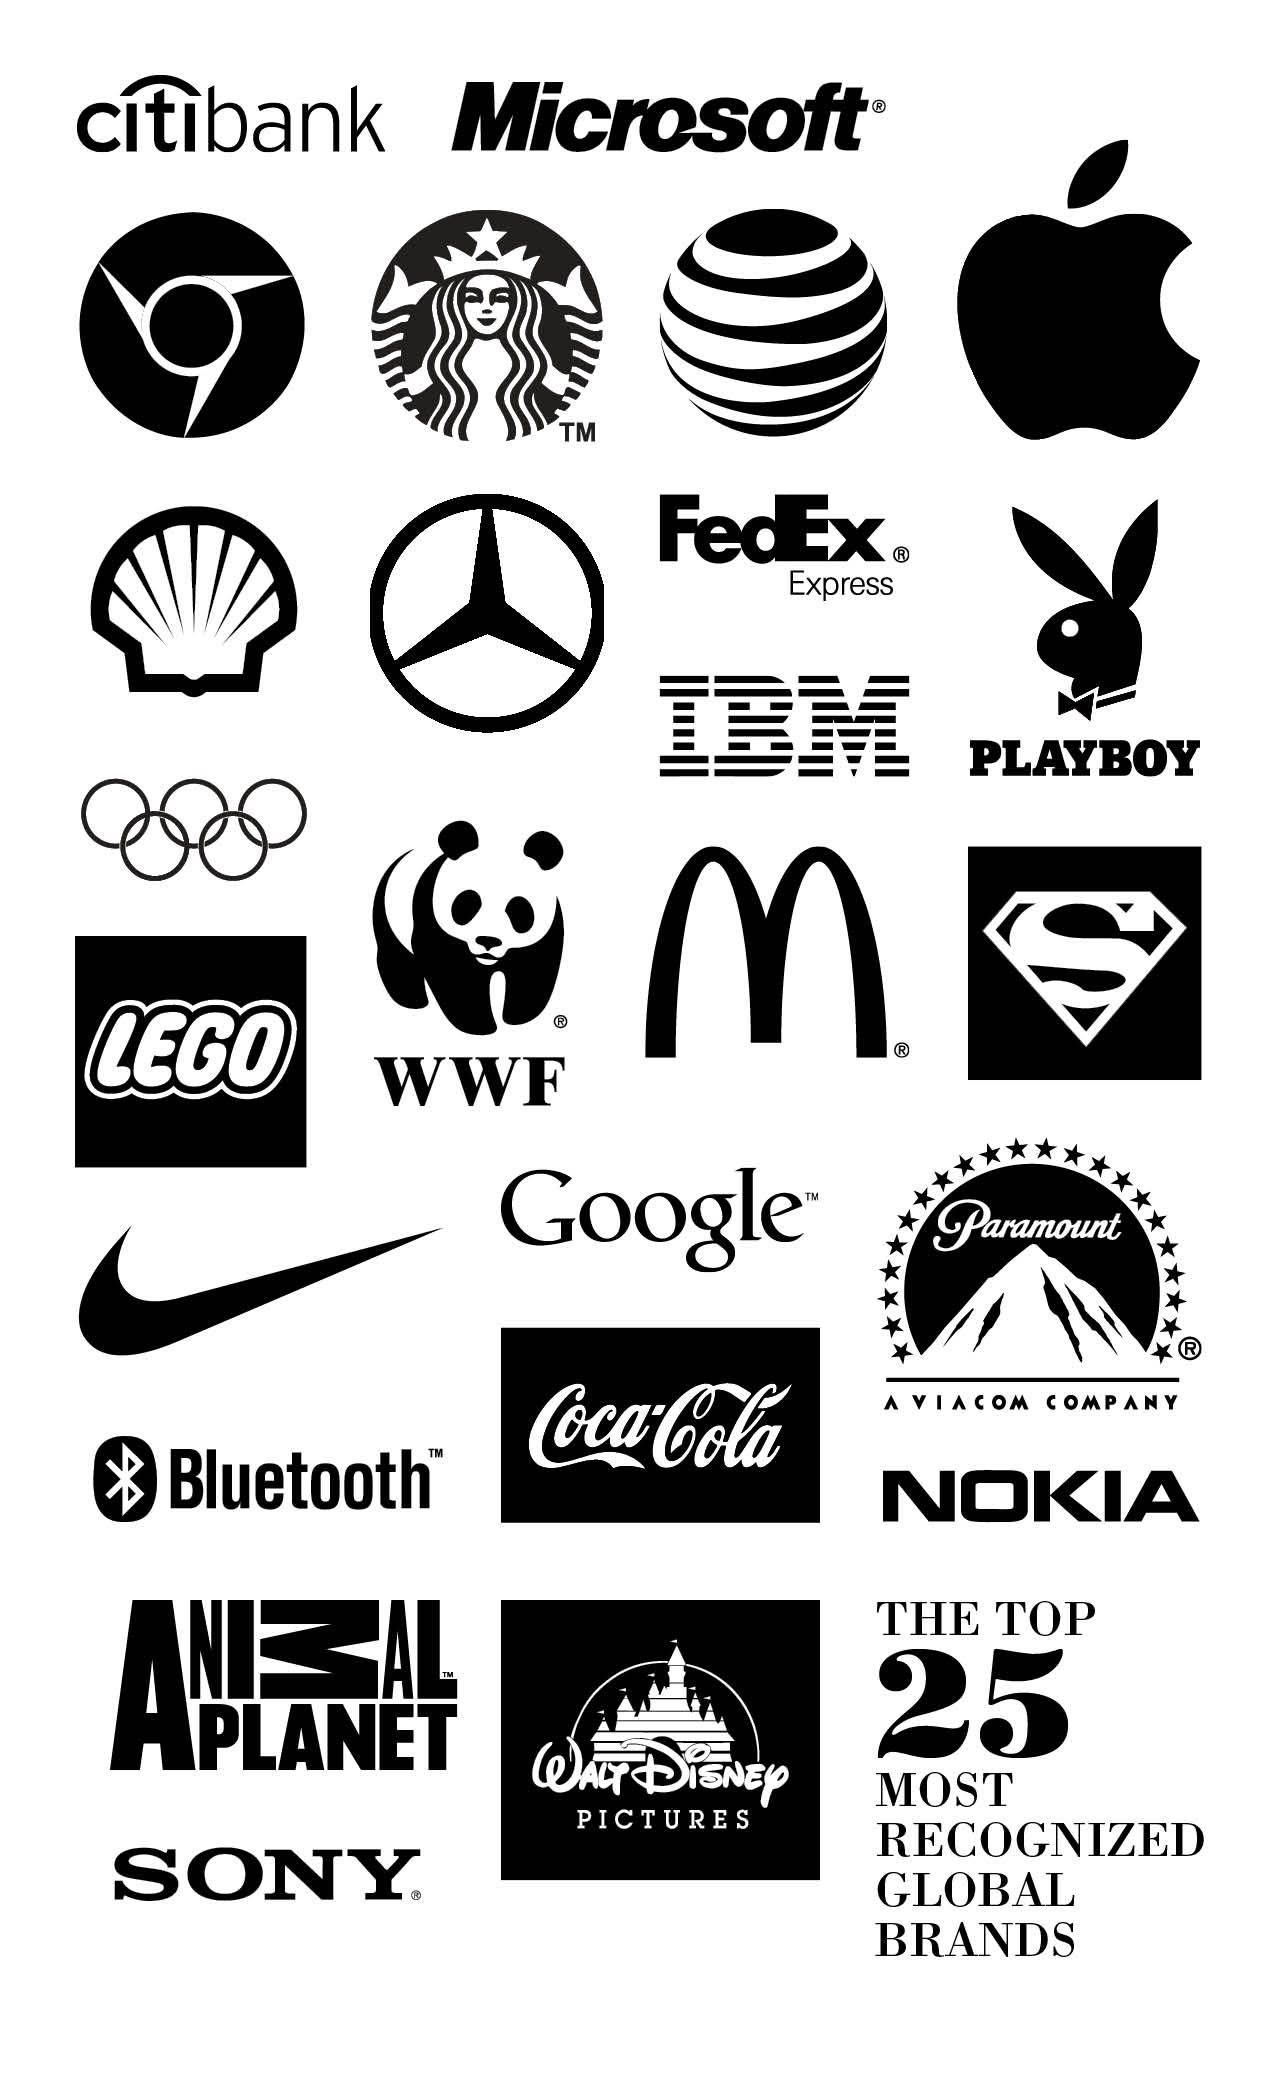 Black and White Brand Logo - The most recognized global brands